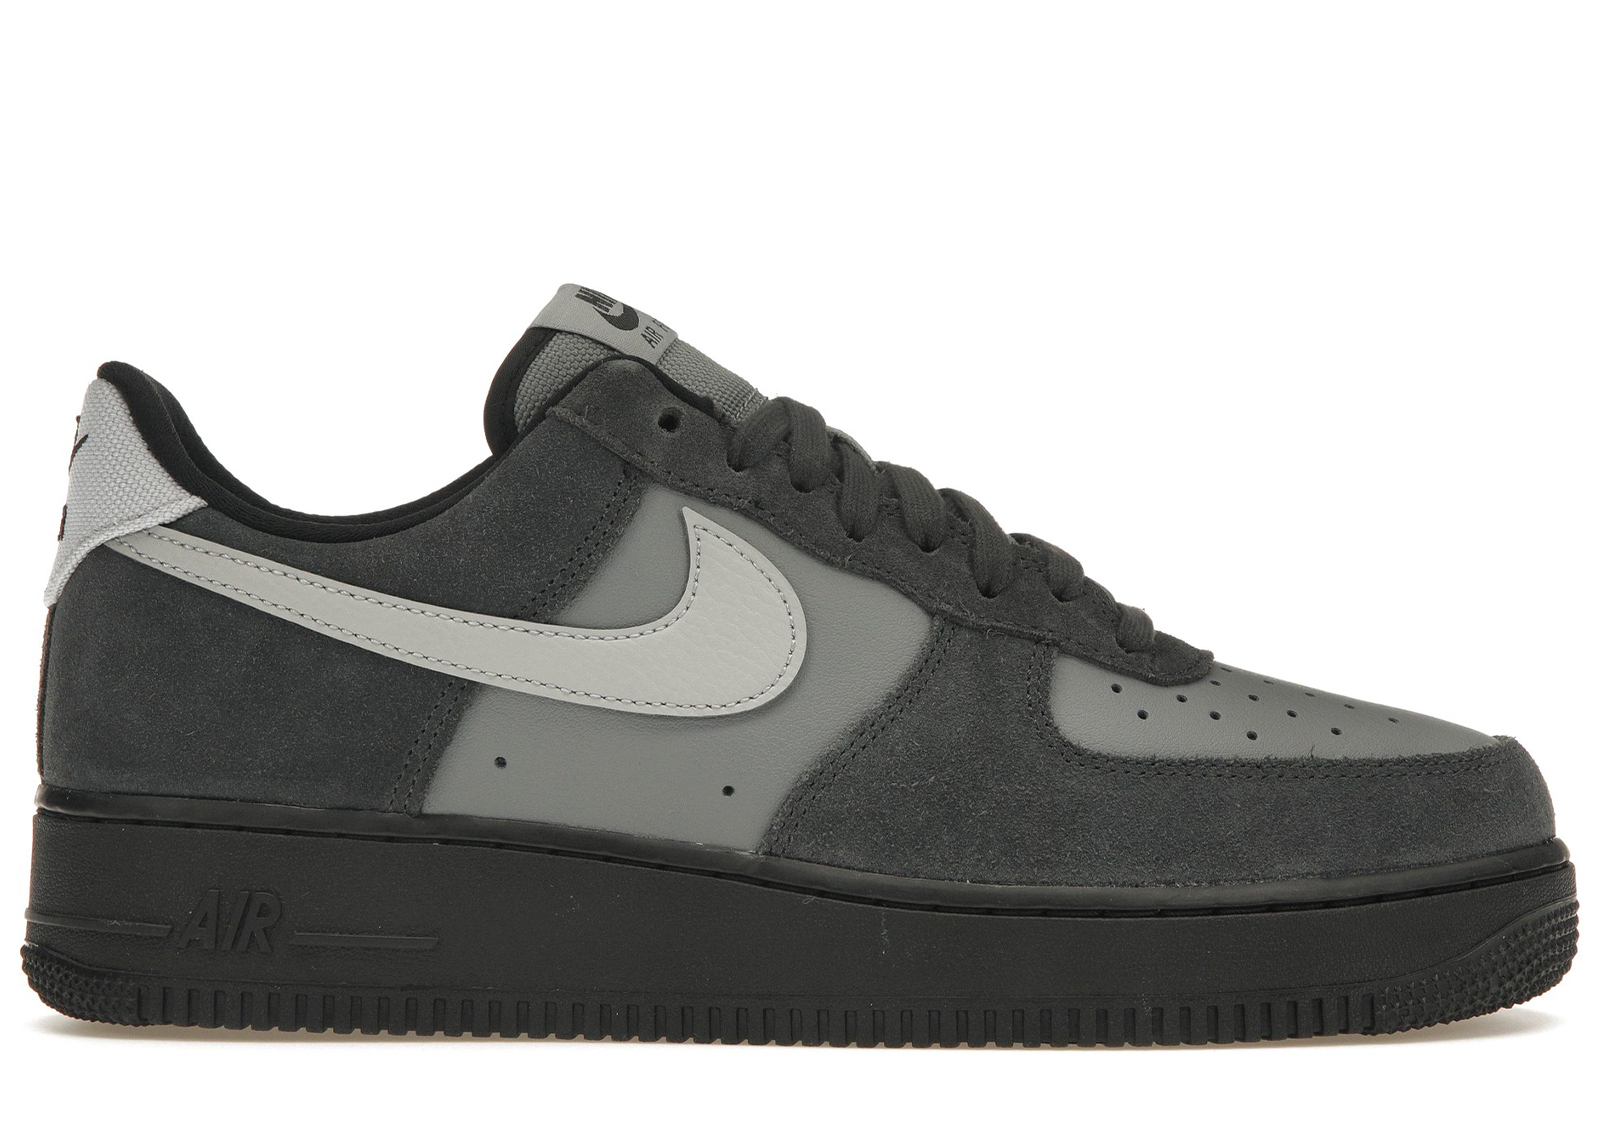 Nike Air Force 1 Low LV8 Anthracite Cool Grey Men's - CW7584-001